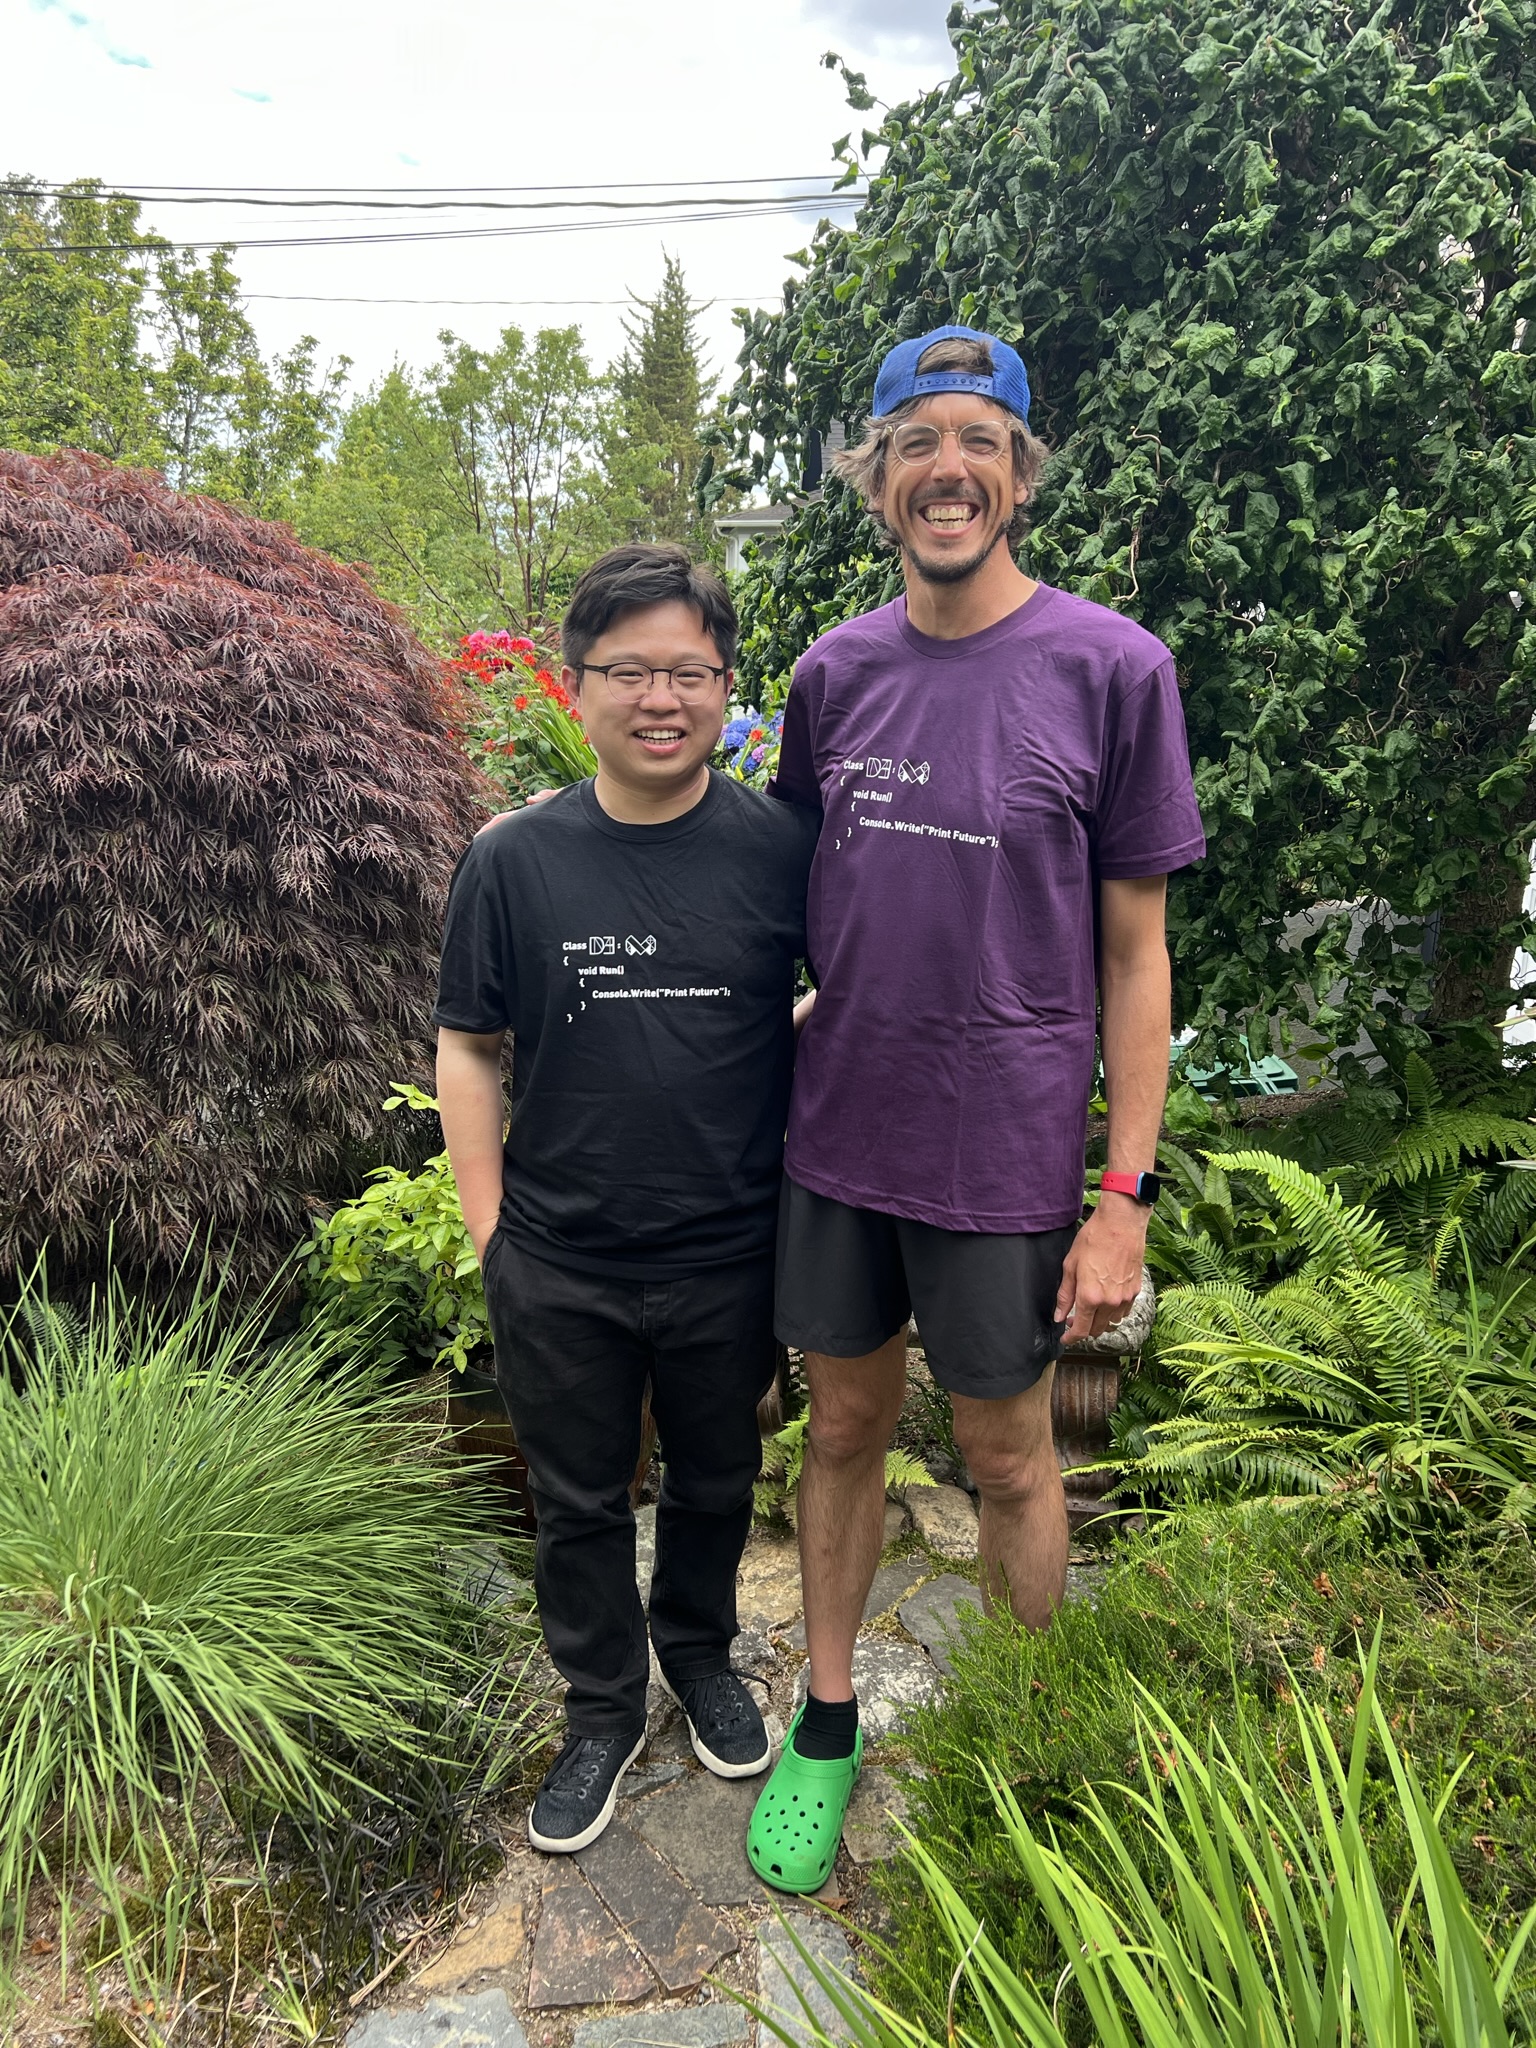 A picture of Liang and Jon standing together in our new t-shirts